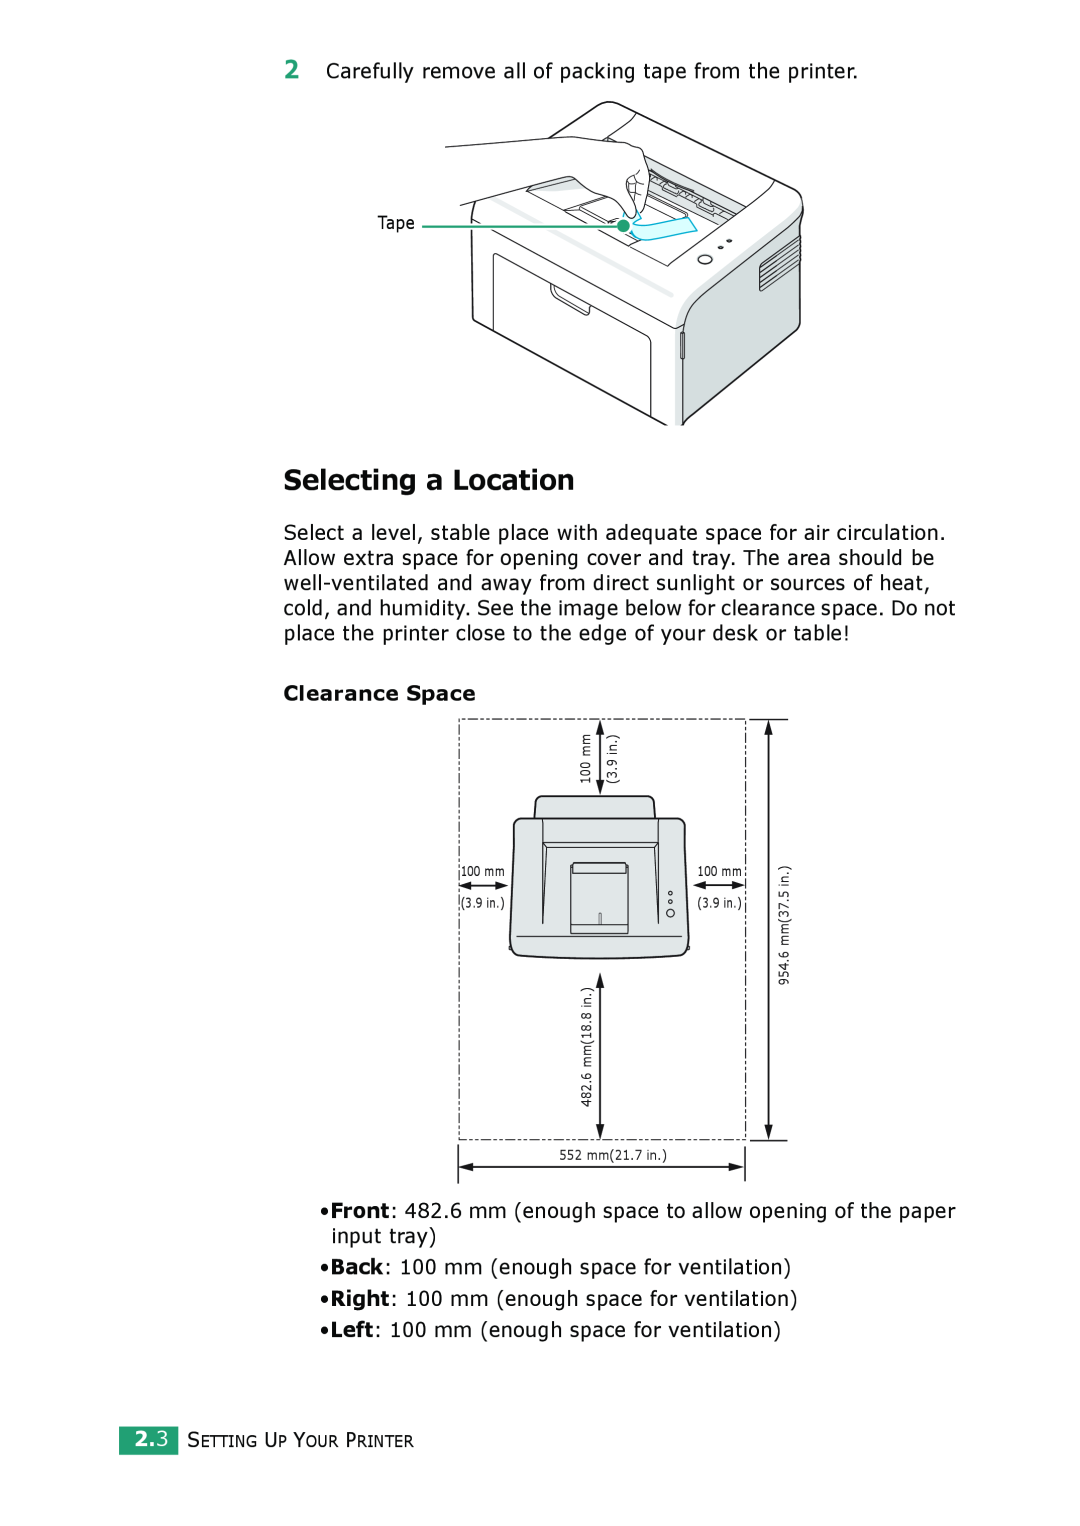 Samsung ML-1610 manual Selecting a Location, Clearance Space 